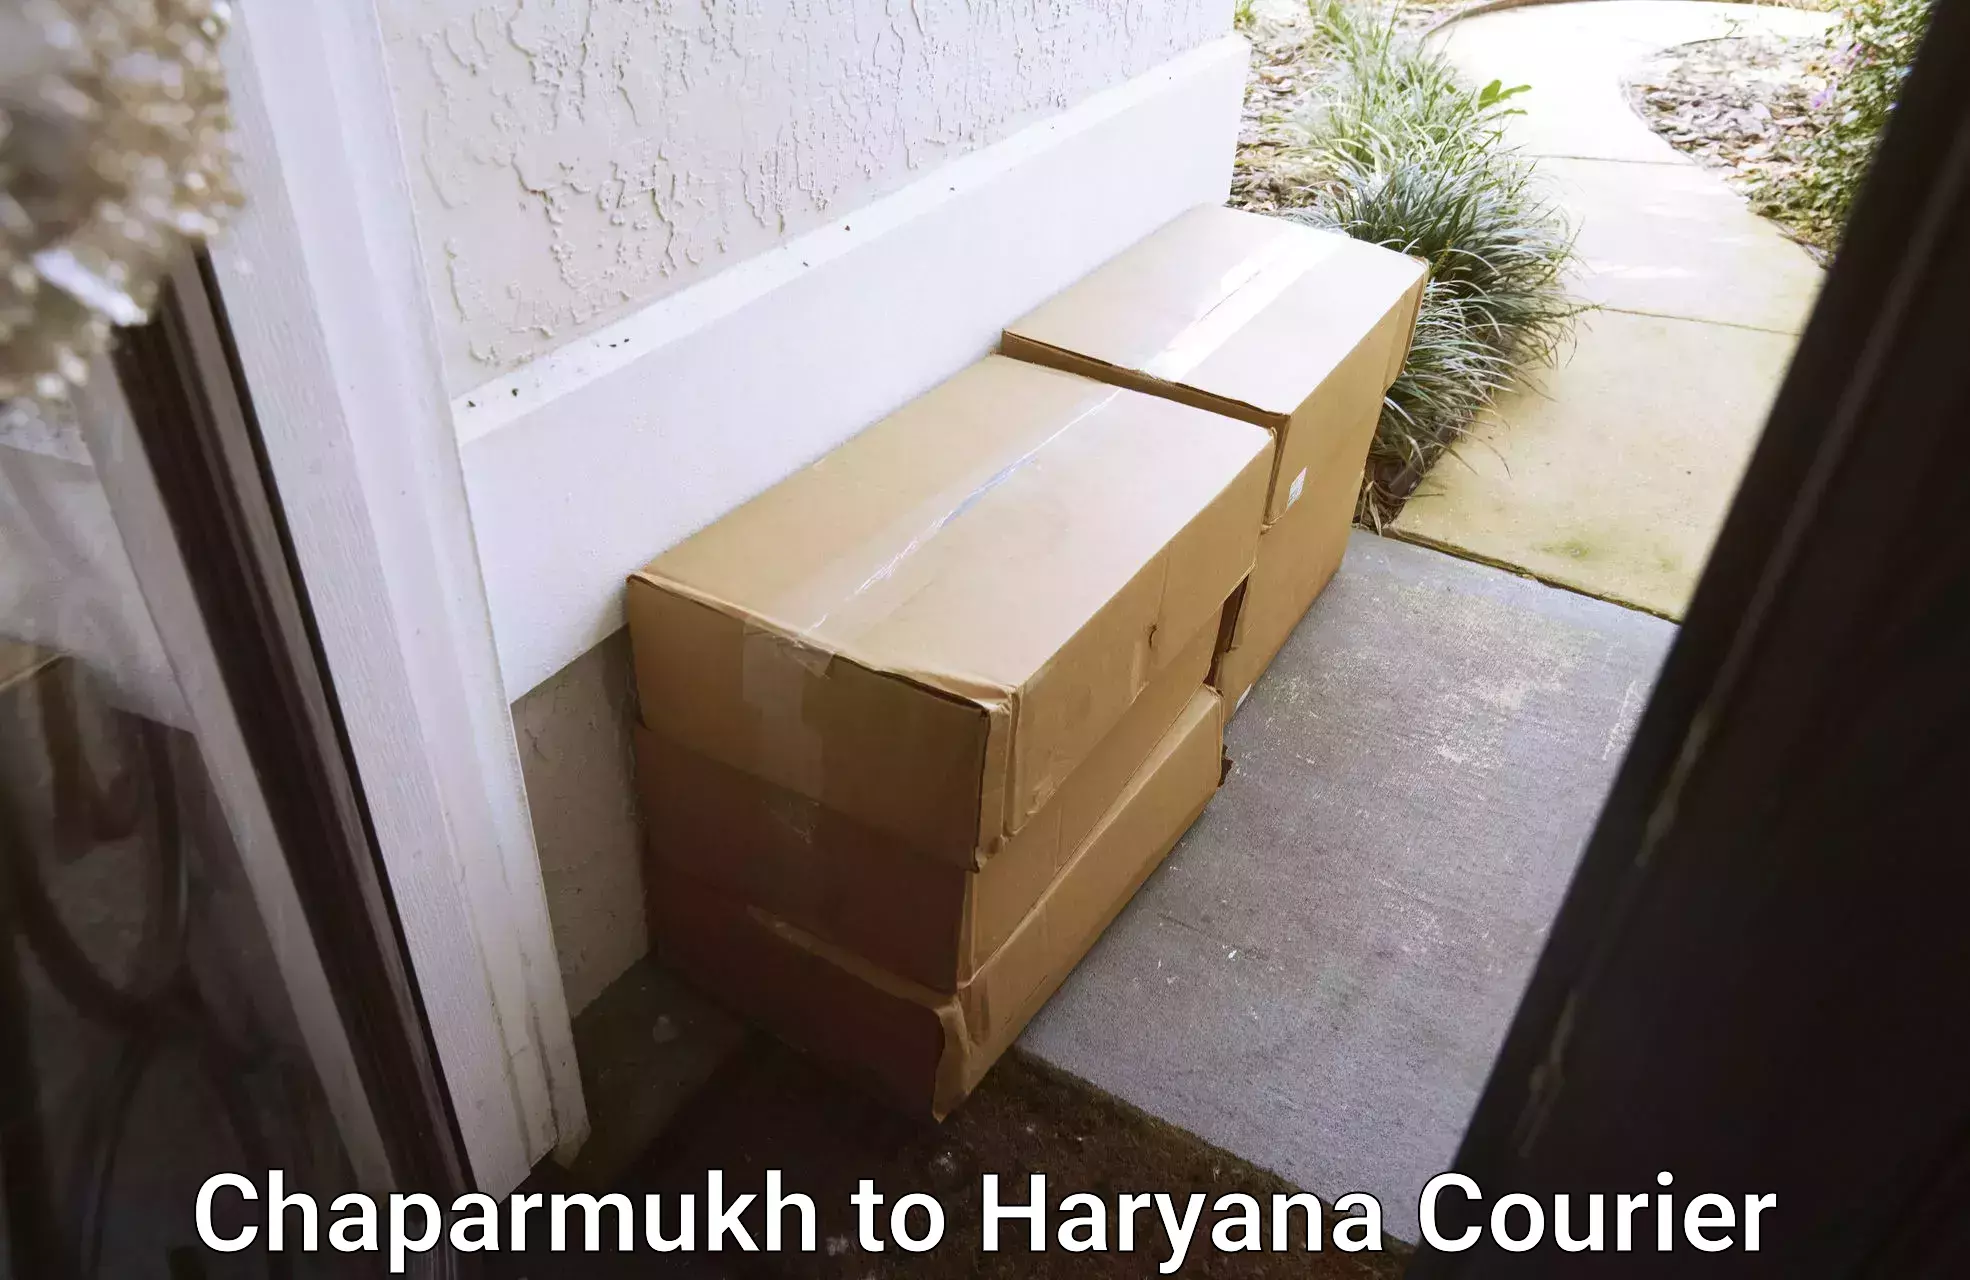 Same-day delivery solutions Chaparmukh to Sonipat